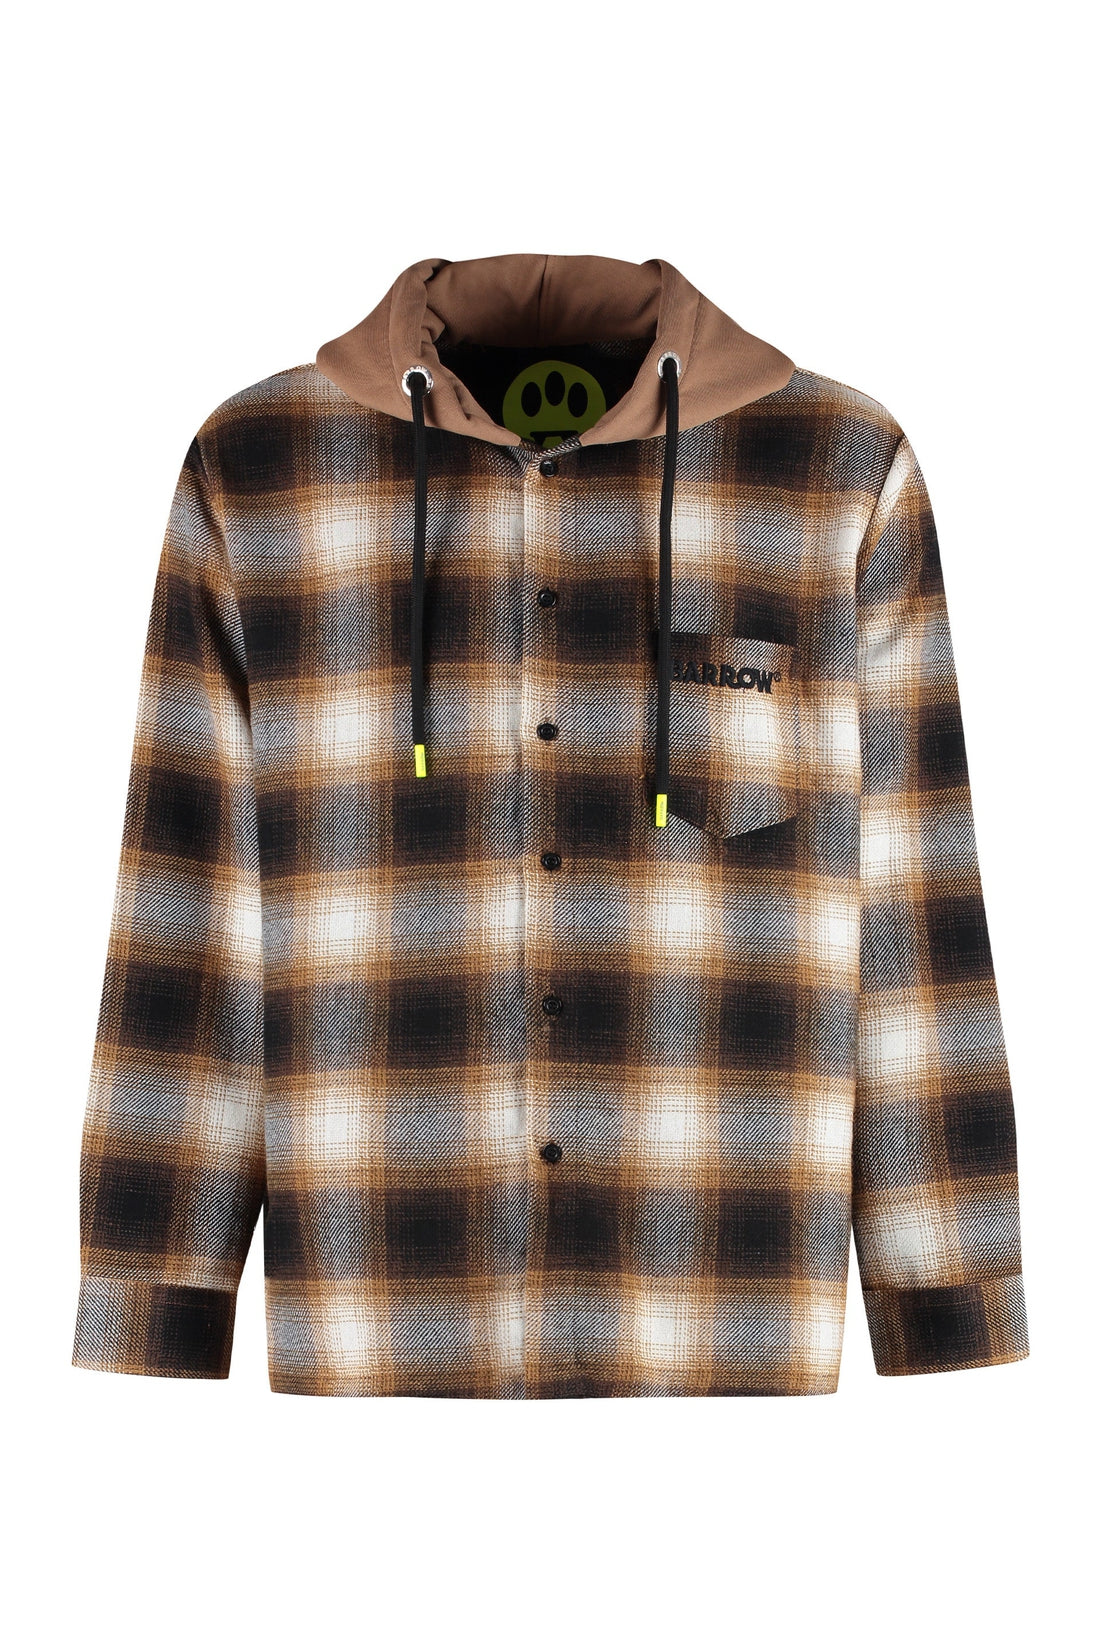 Barrow-OUTLET-SALE-Checked shirt with jersey hood-ARCHIVIST